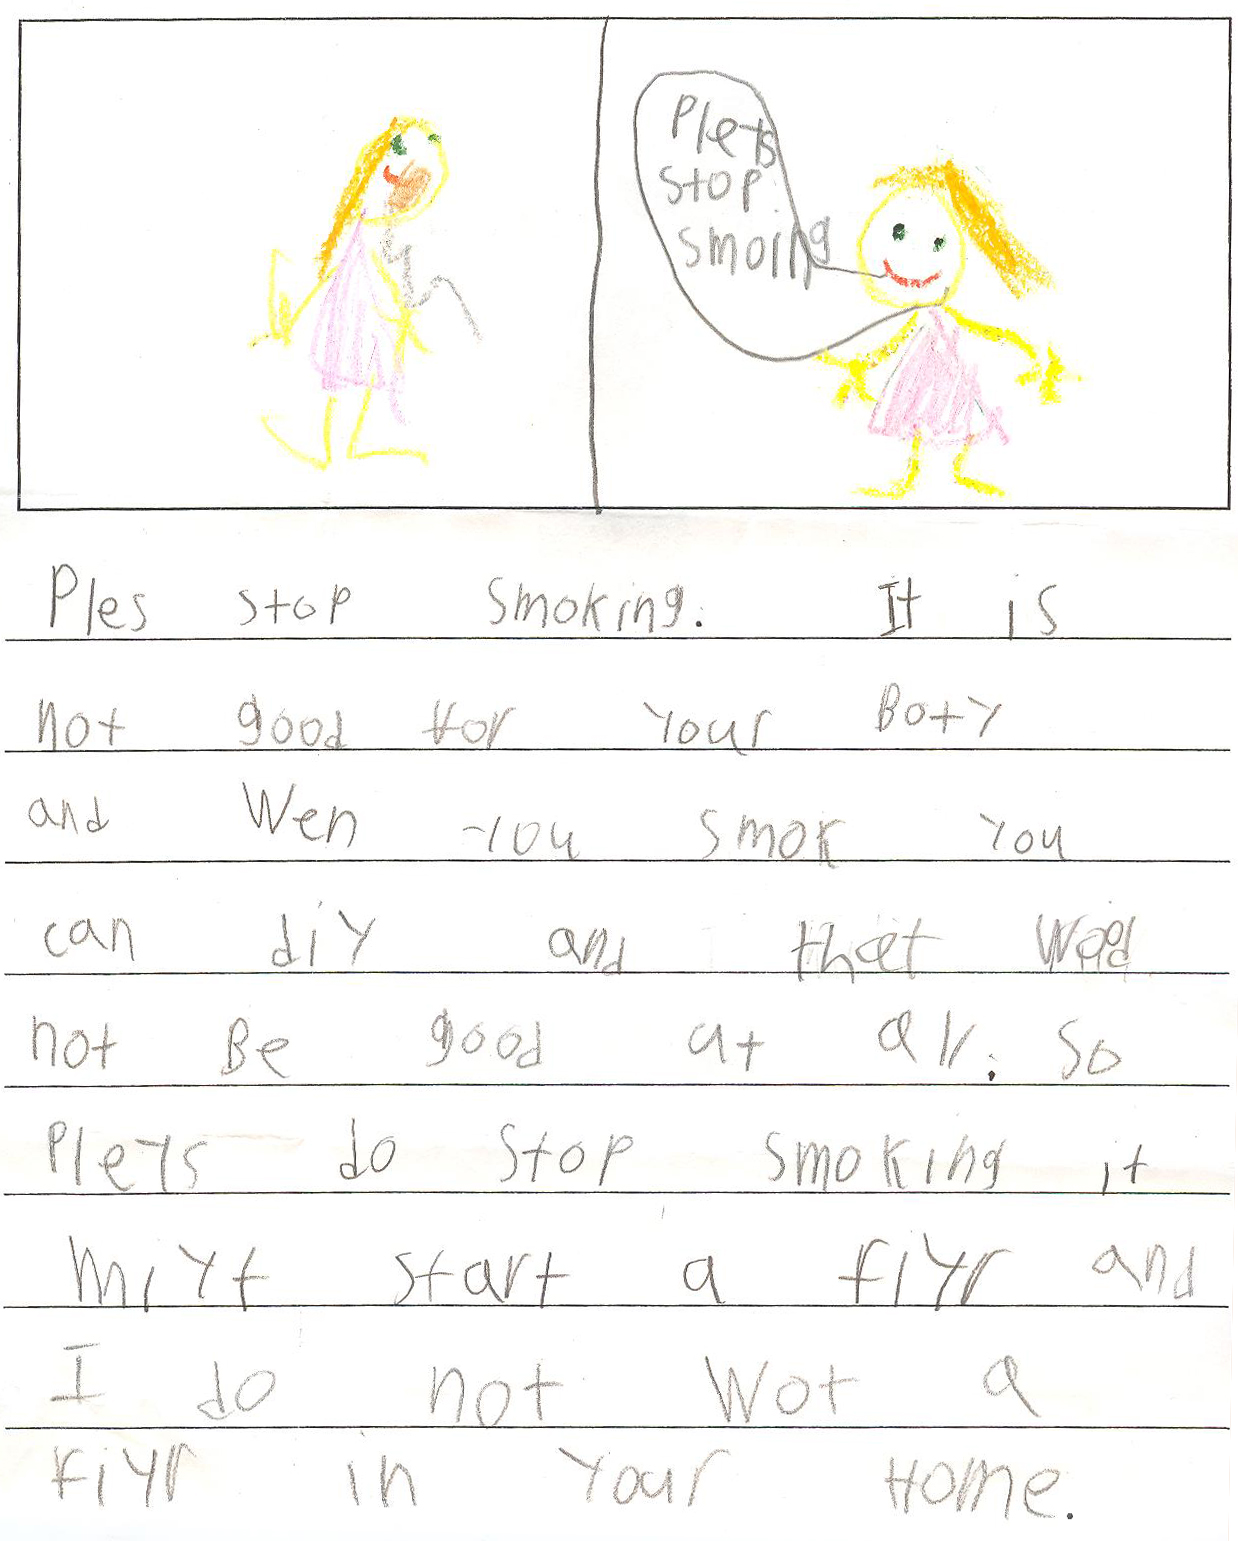 Elementary student encourages people to quit smoking